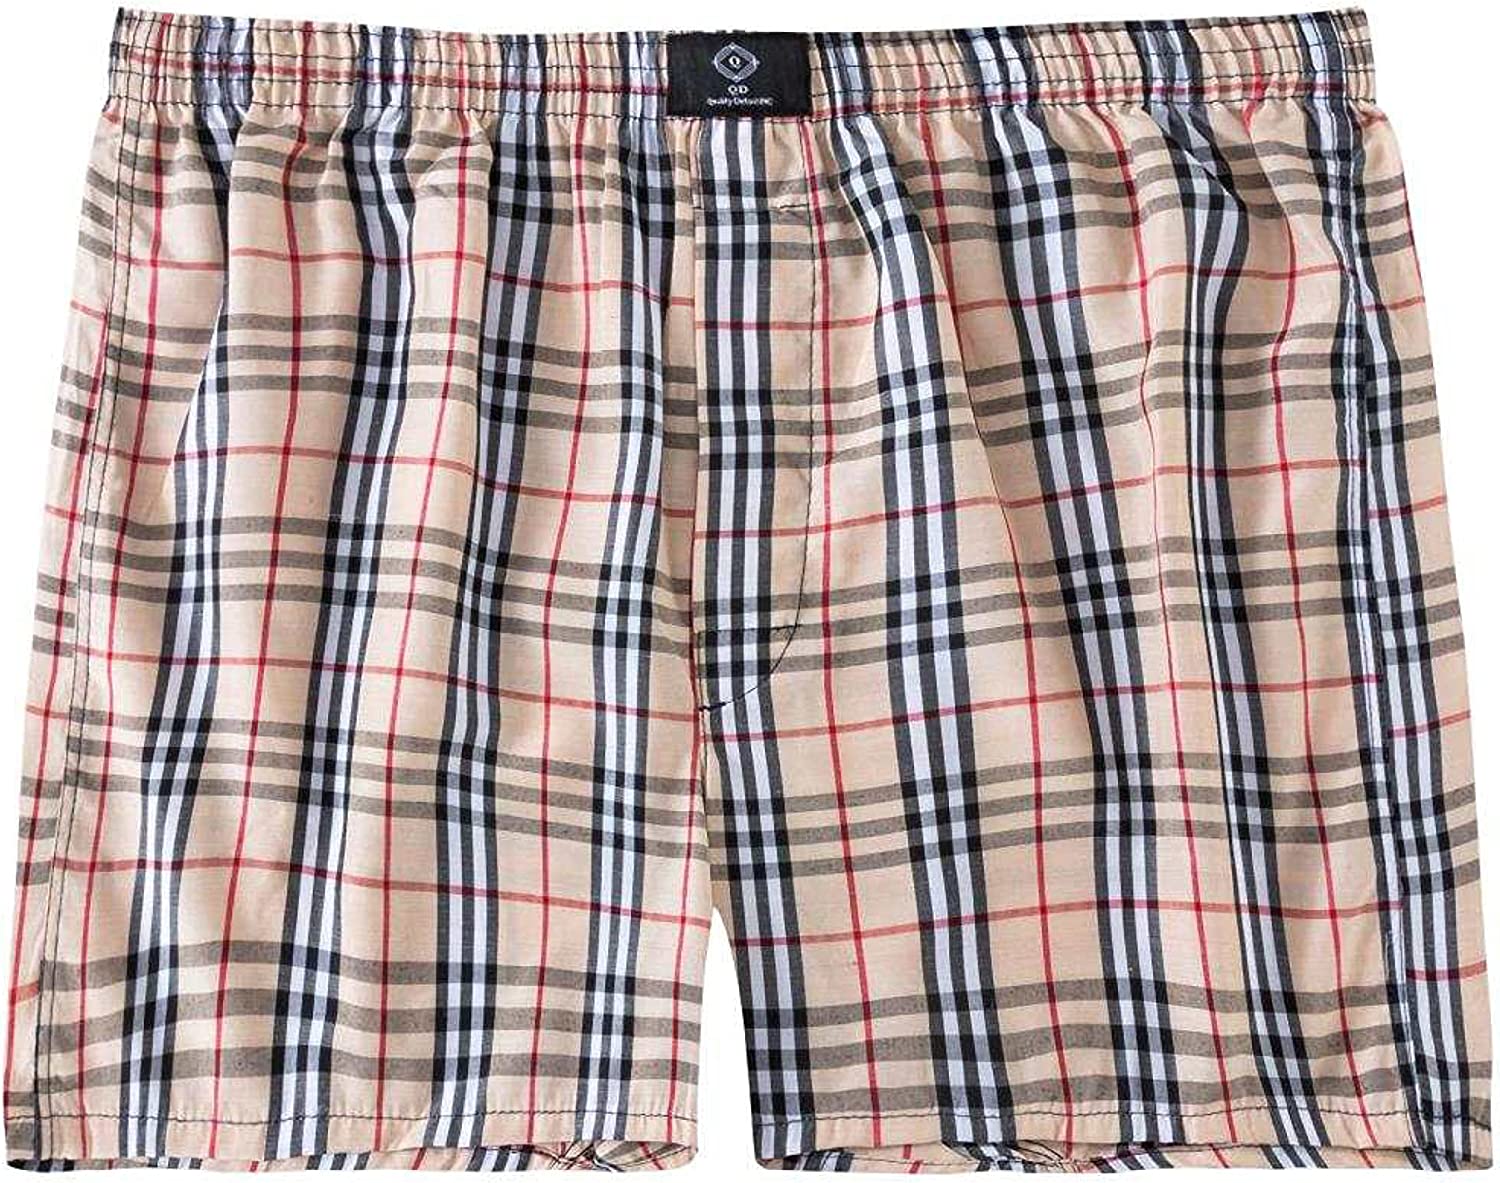 Quality Detail 6 Pack Of XL Classic Woven Boxers